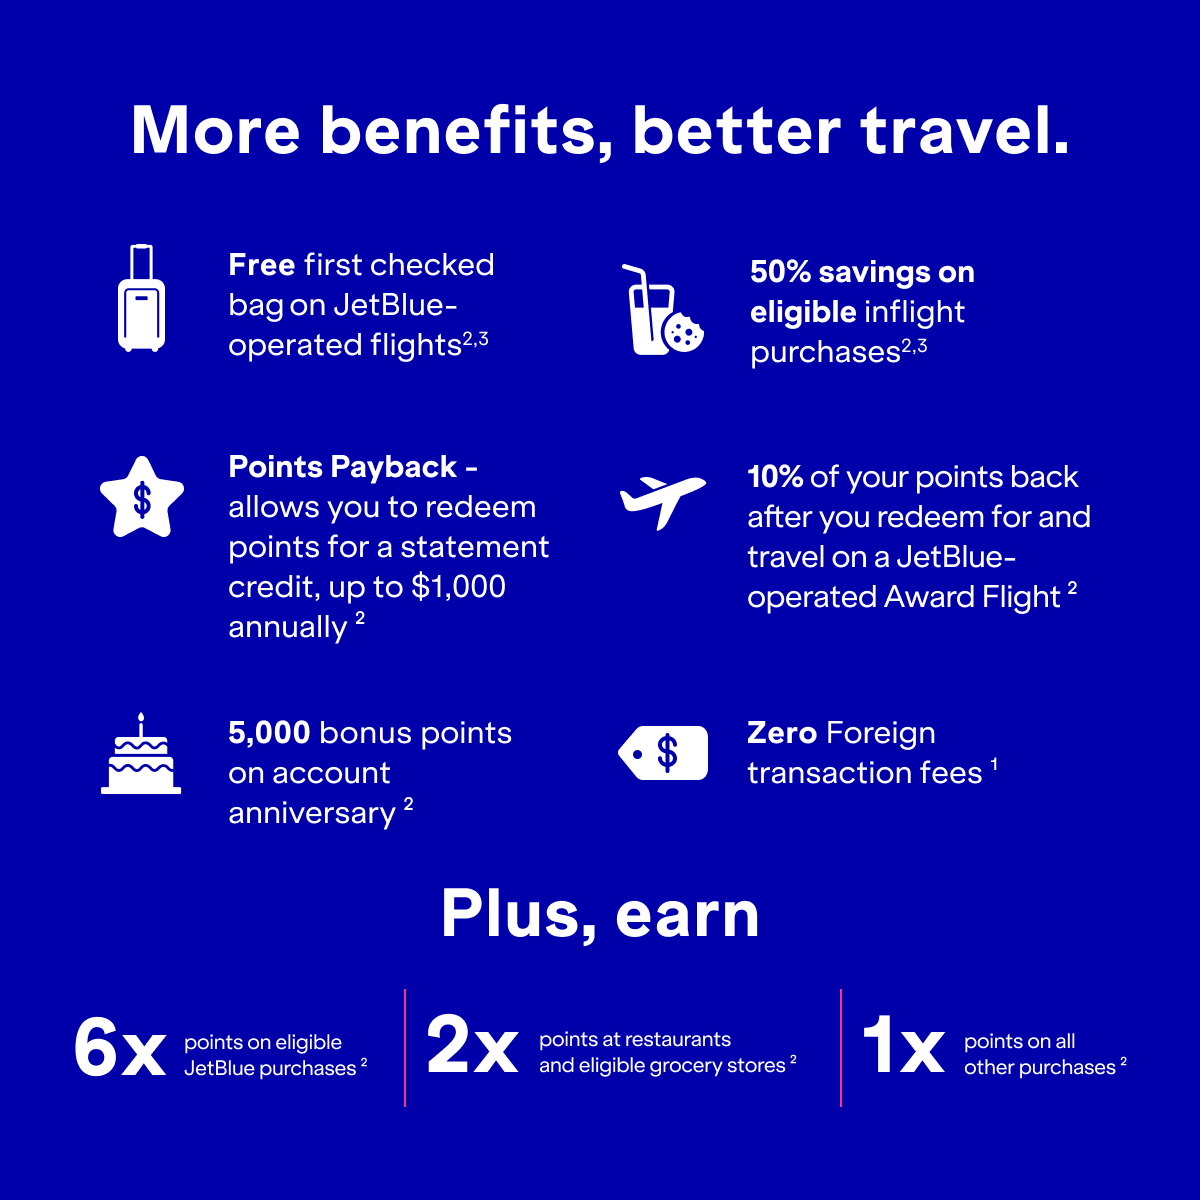 More benefits, better travel. Free first checked bag on JetBlue operated flights(2,3). Points Payback - allows you to redeem points for a statement credit, up to $1,000 annually(2). 5,000 bonus points on account anniversary(2). 50% savings on eligible inflight purchases(2,3). 10% of your points back when you redeem for and travel on a JetBlue-operated Award Flight(2). Zero Foreign transaction fees(1). Plus earn 6x points on eligible JetBlue purchases(2). 2x points at restaurants and eligible grocery stores(2). 1x points on all other purchases(2).